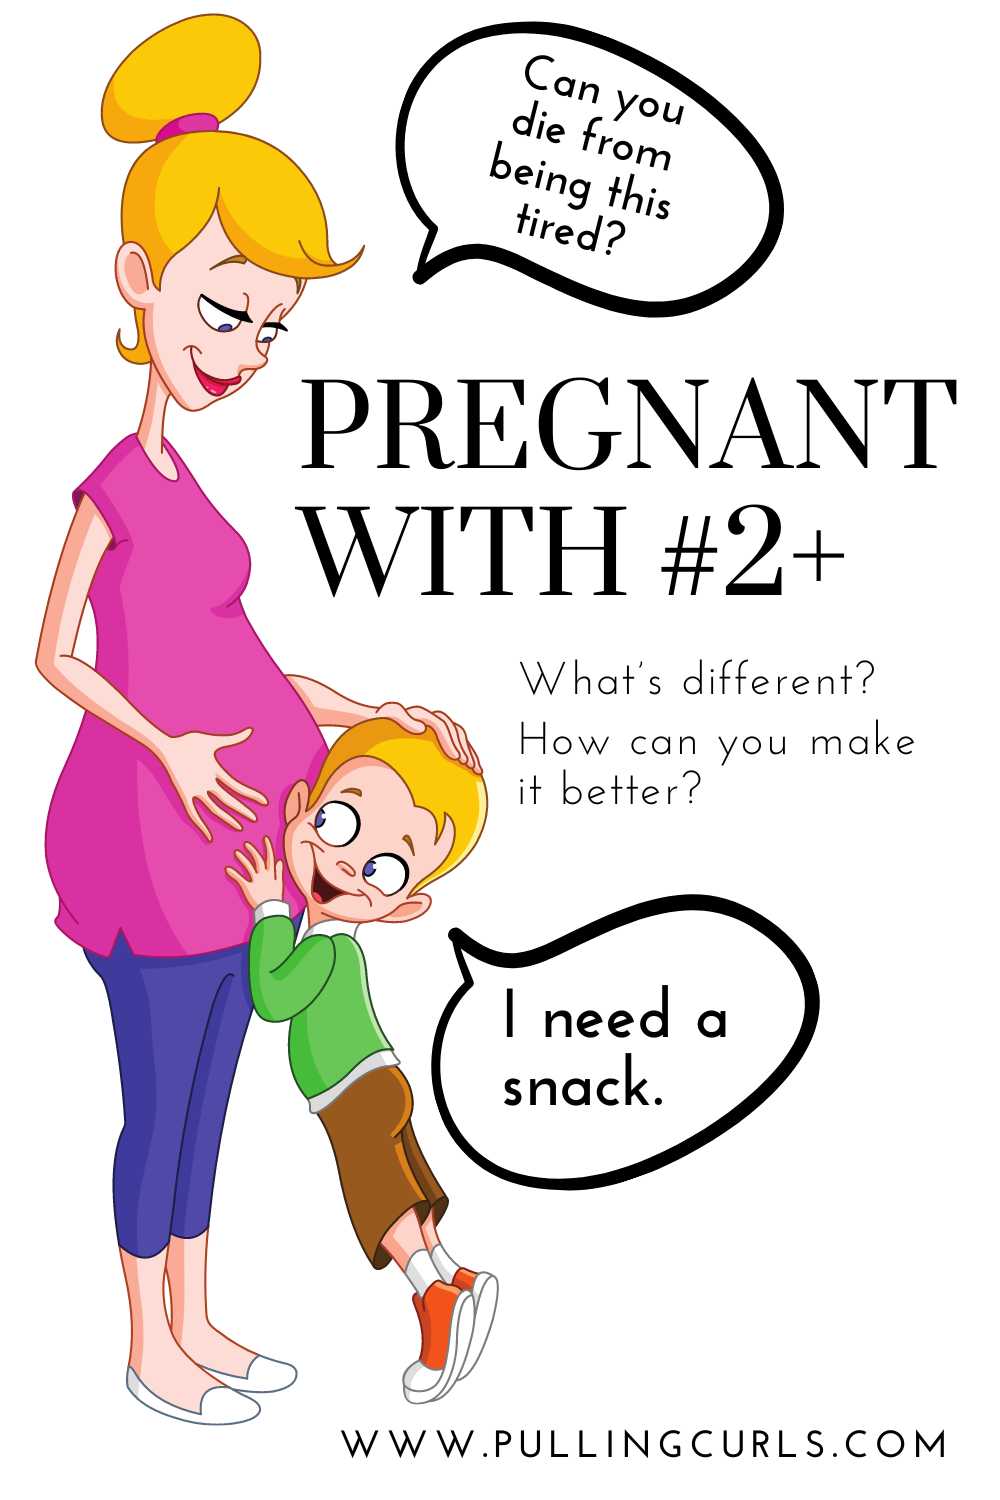 pregnant woman with son -- pregnant woman says "can you die from being this tired" and the son says "I need a snack" .// Pregnant with #2+ // what's different, how can you make it better via @pullingcurls